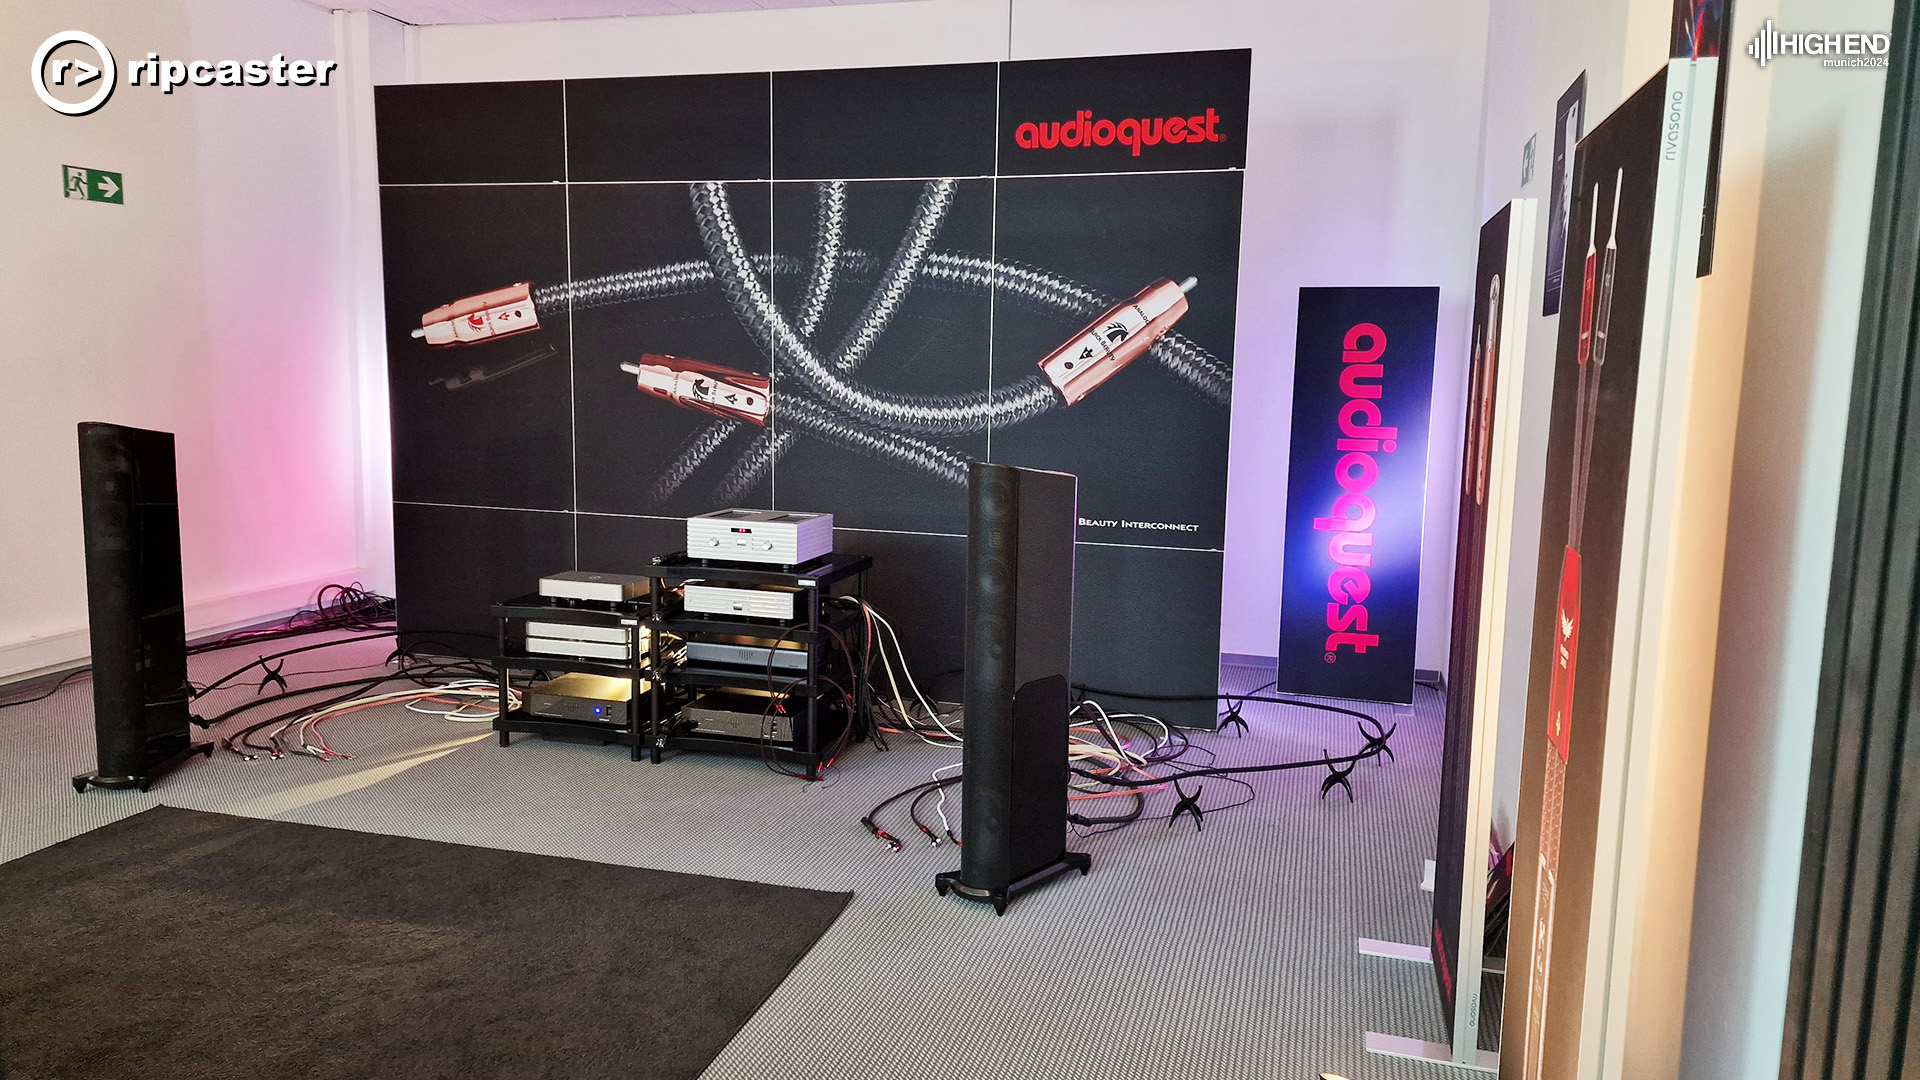 The Audioquest room with speakers and HiFi equipment at the front with large Audioquest signage at the back of the room.